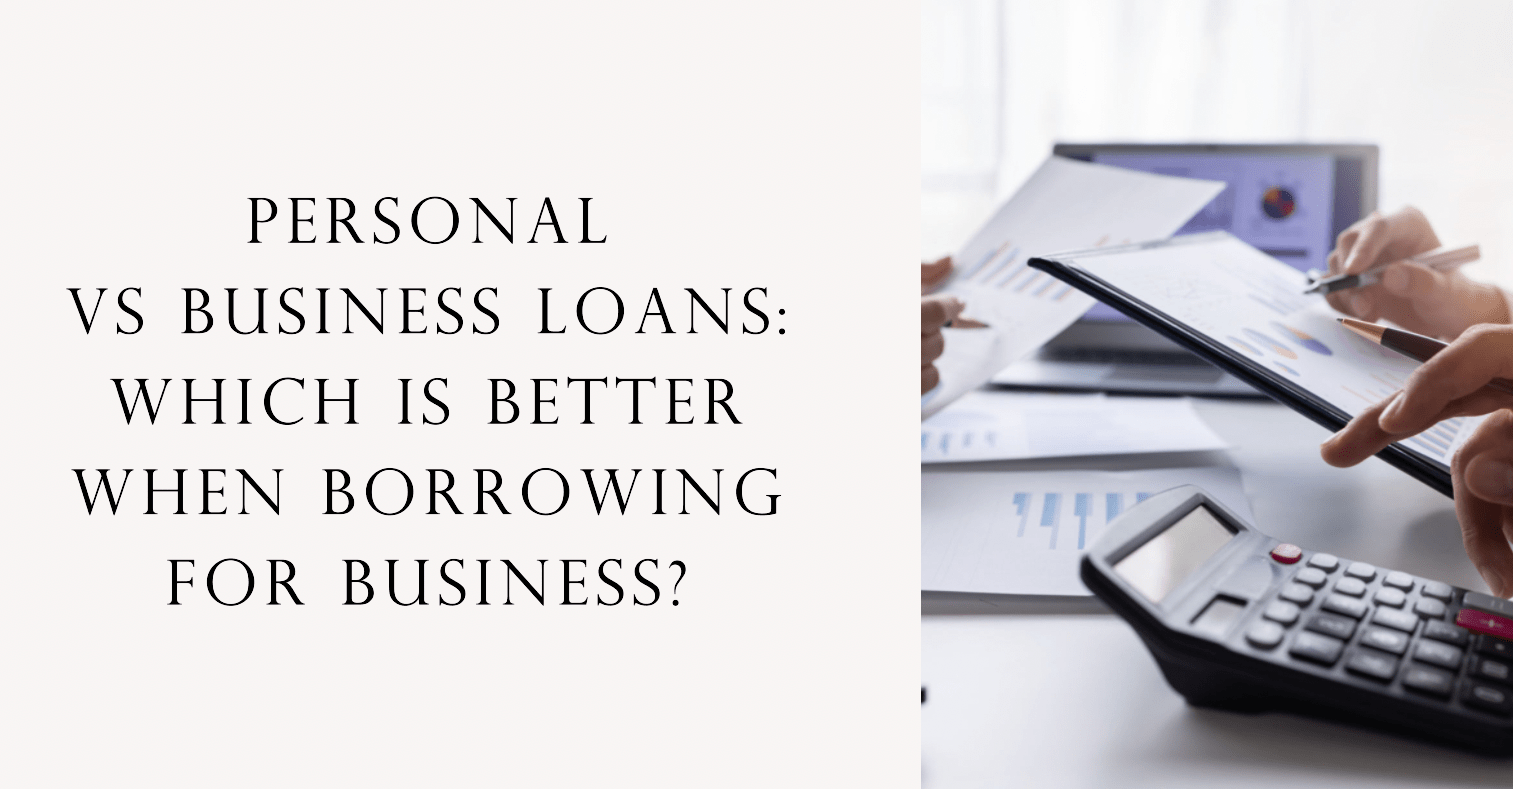 Personal and Business Loans